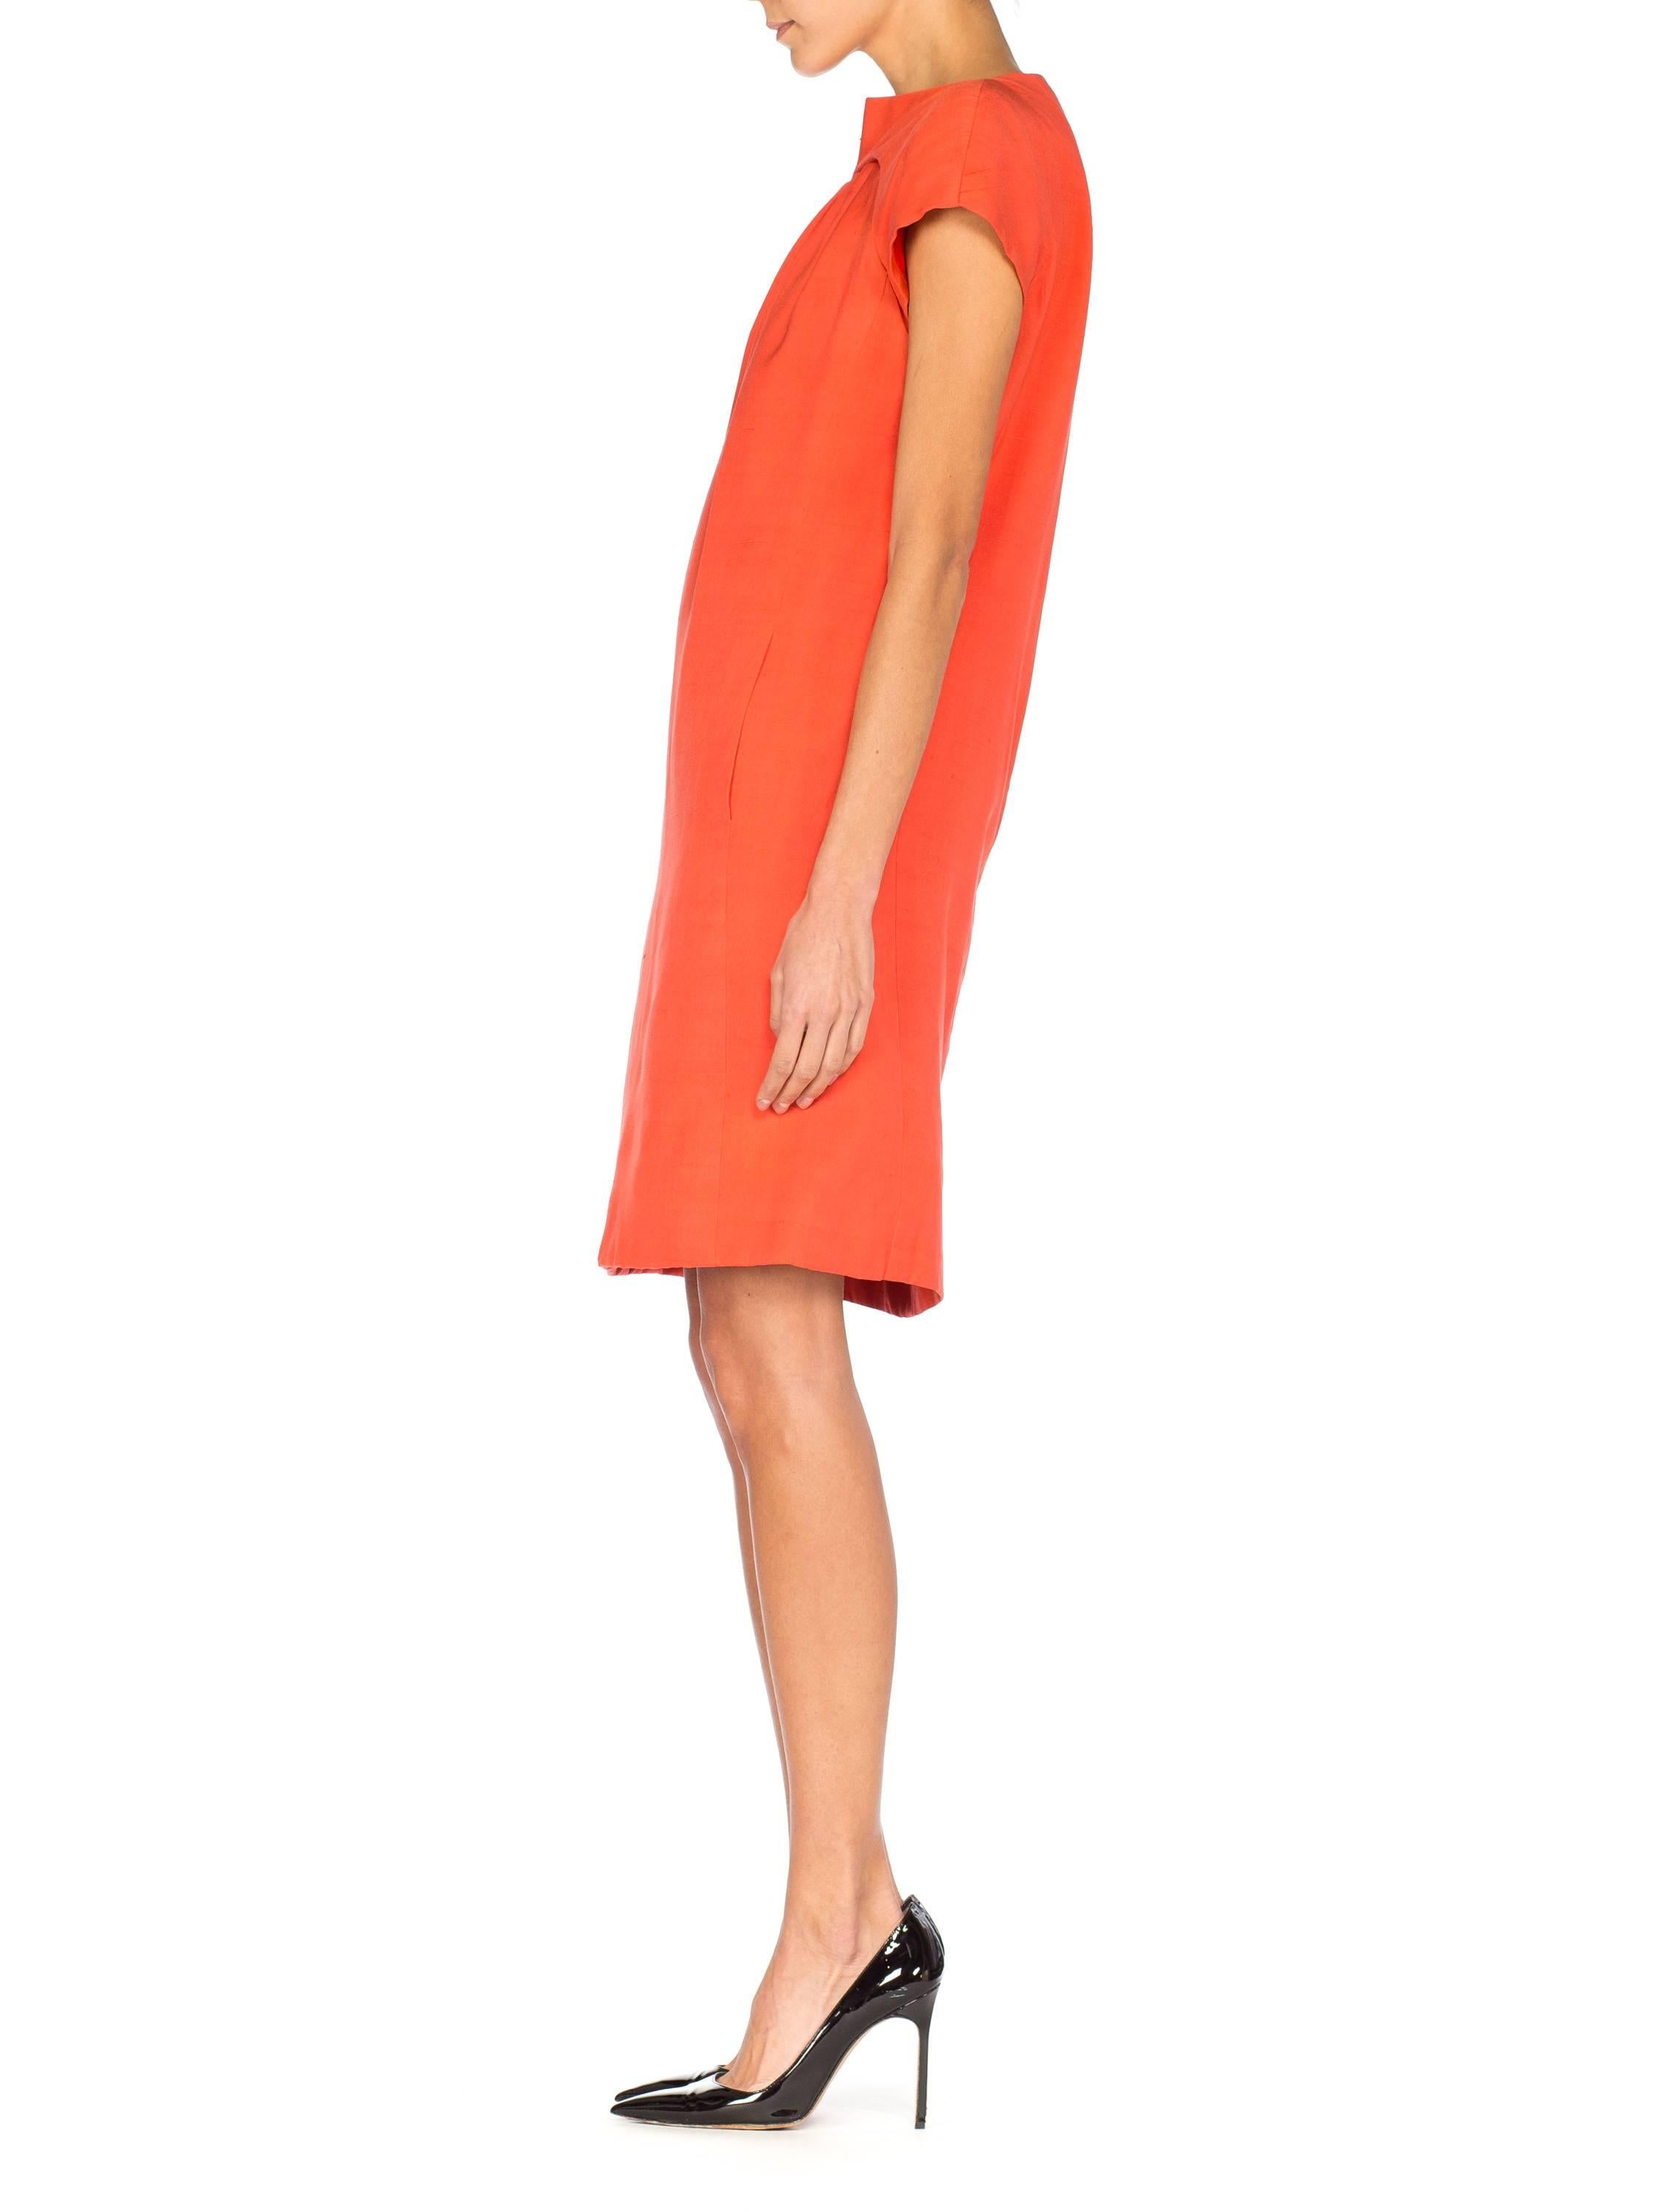 1960S GEOFFREY BEENE Coral Silk Mod Sheath Dress In Excellent Condition For Sale In New York, NY